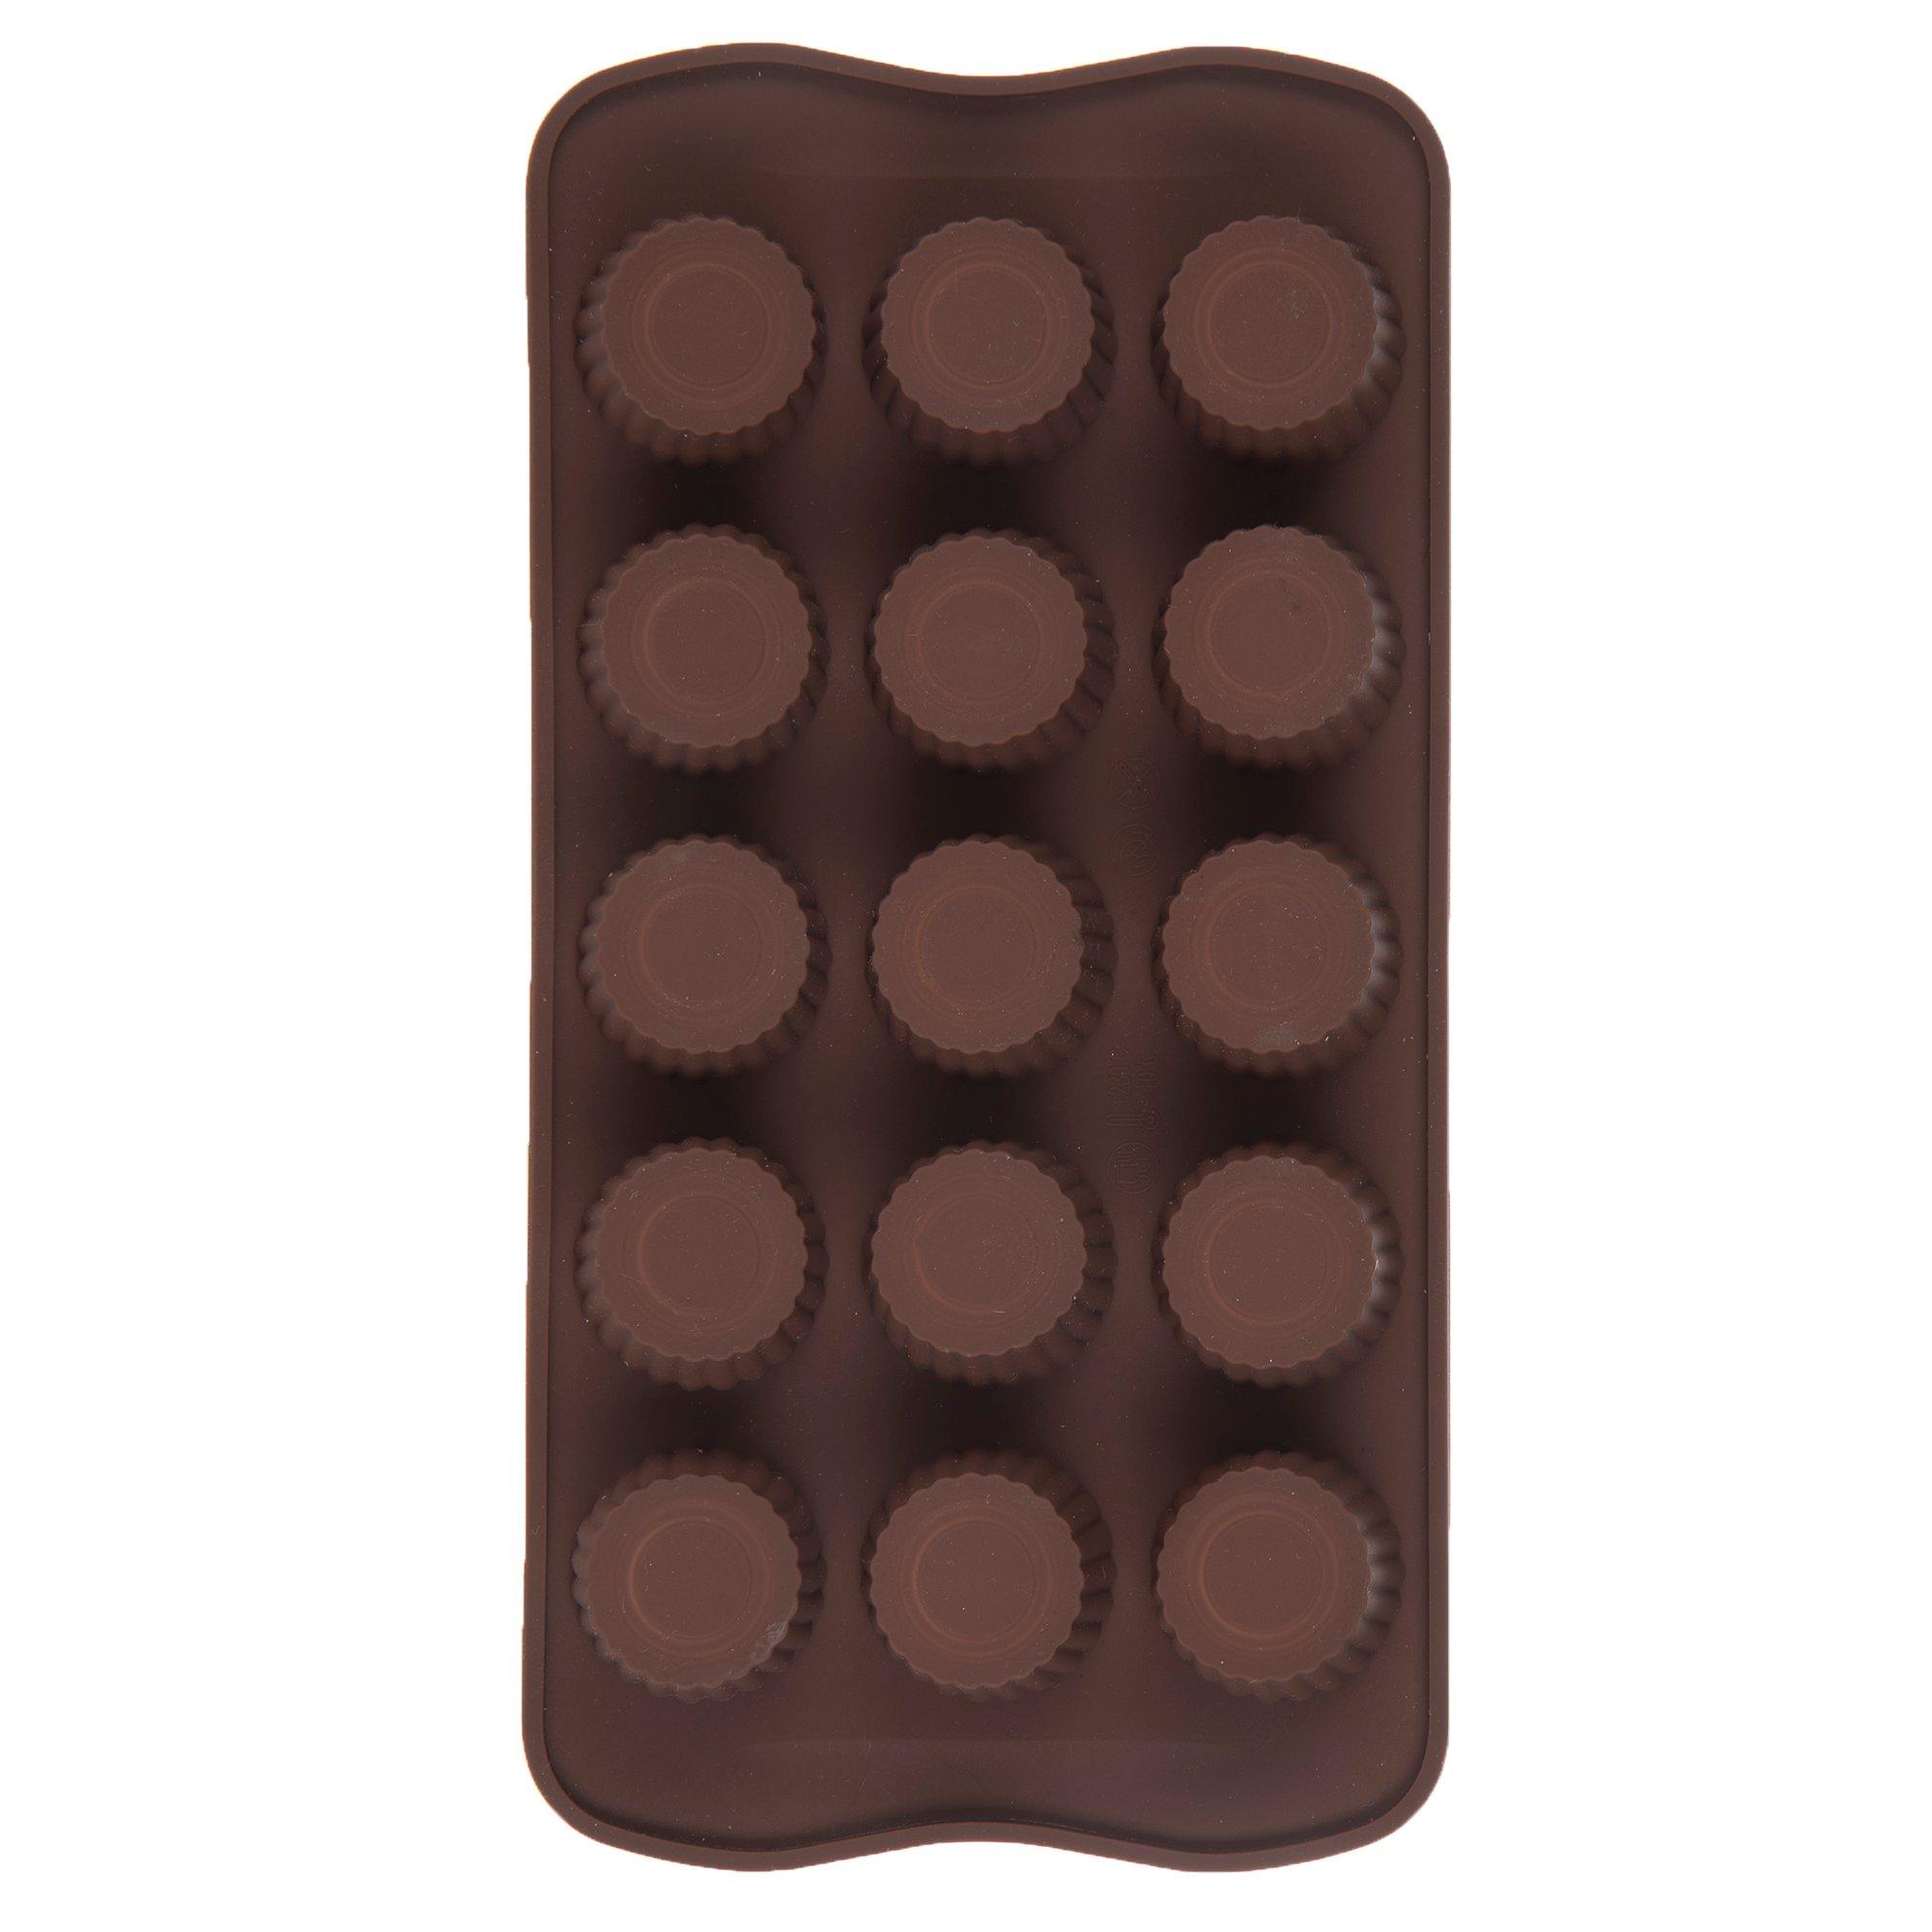 Silicone Chocolate Molds 2pcs Chocolate Cup Molds for Candy,Keto Fat Bombs  & Mini Peanut Butter Cup